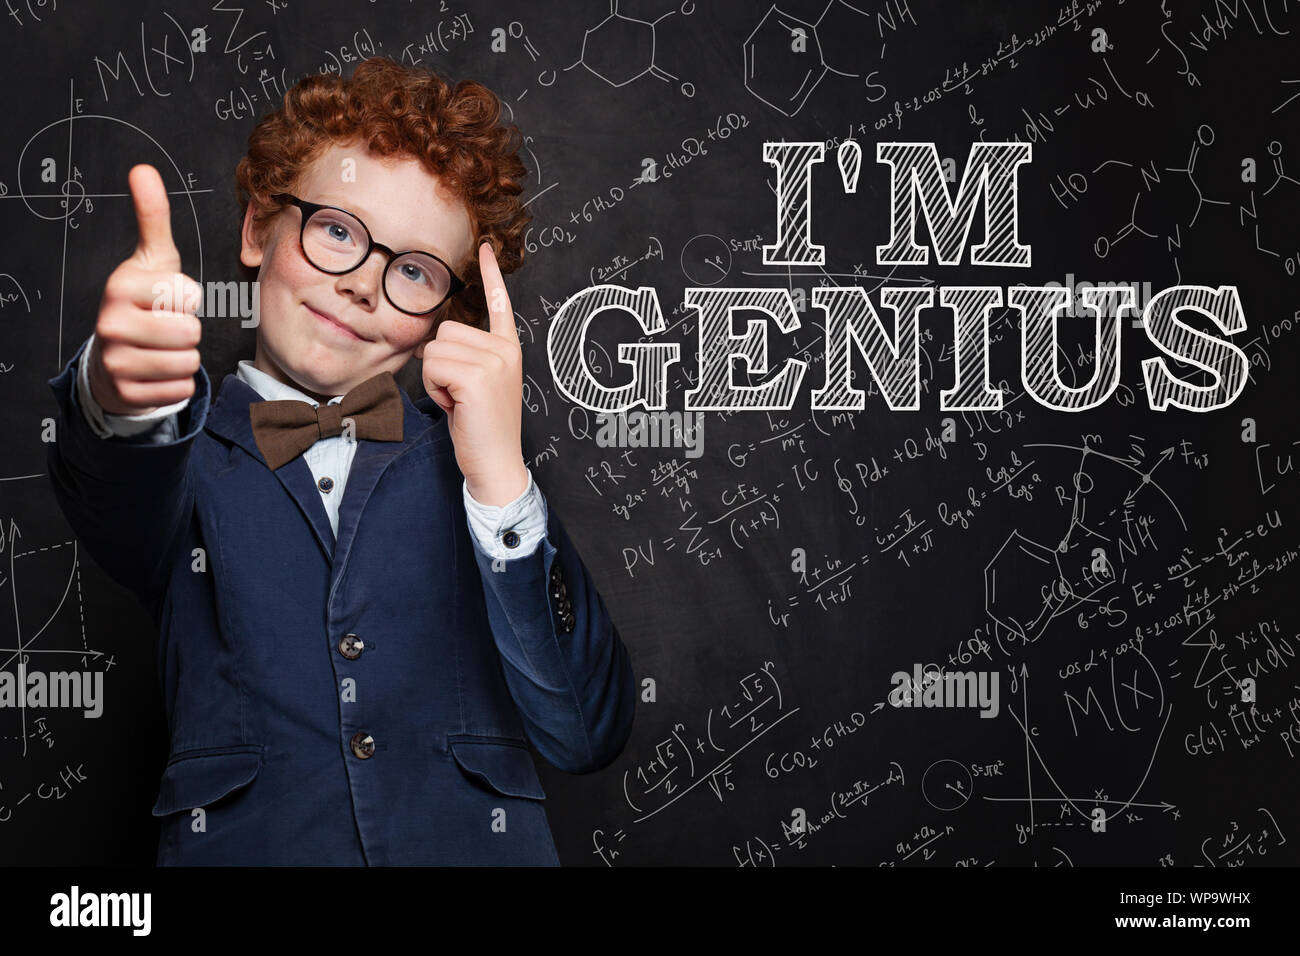 Smiling kid boy with red hair thinking, pointing at his head and standing against blackboard with science formulas Stock Photo